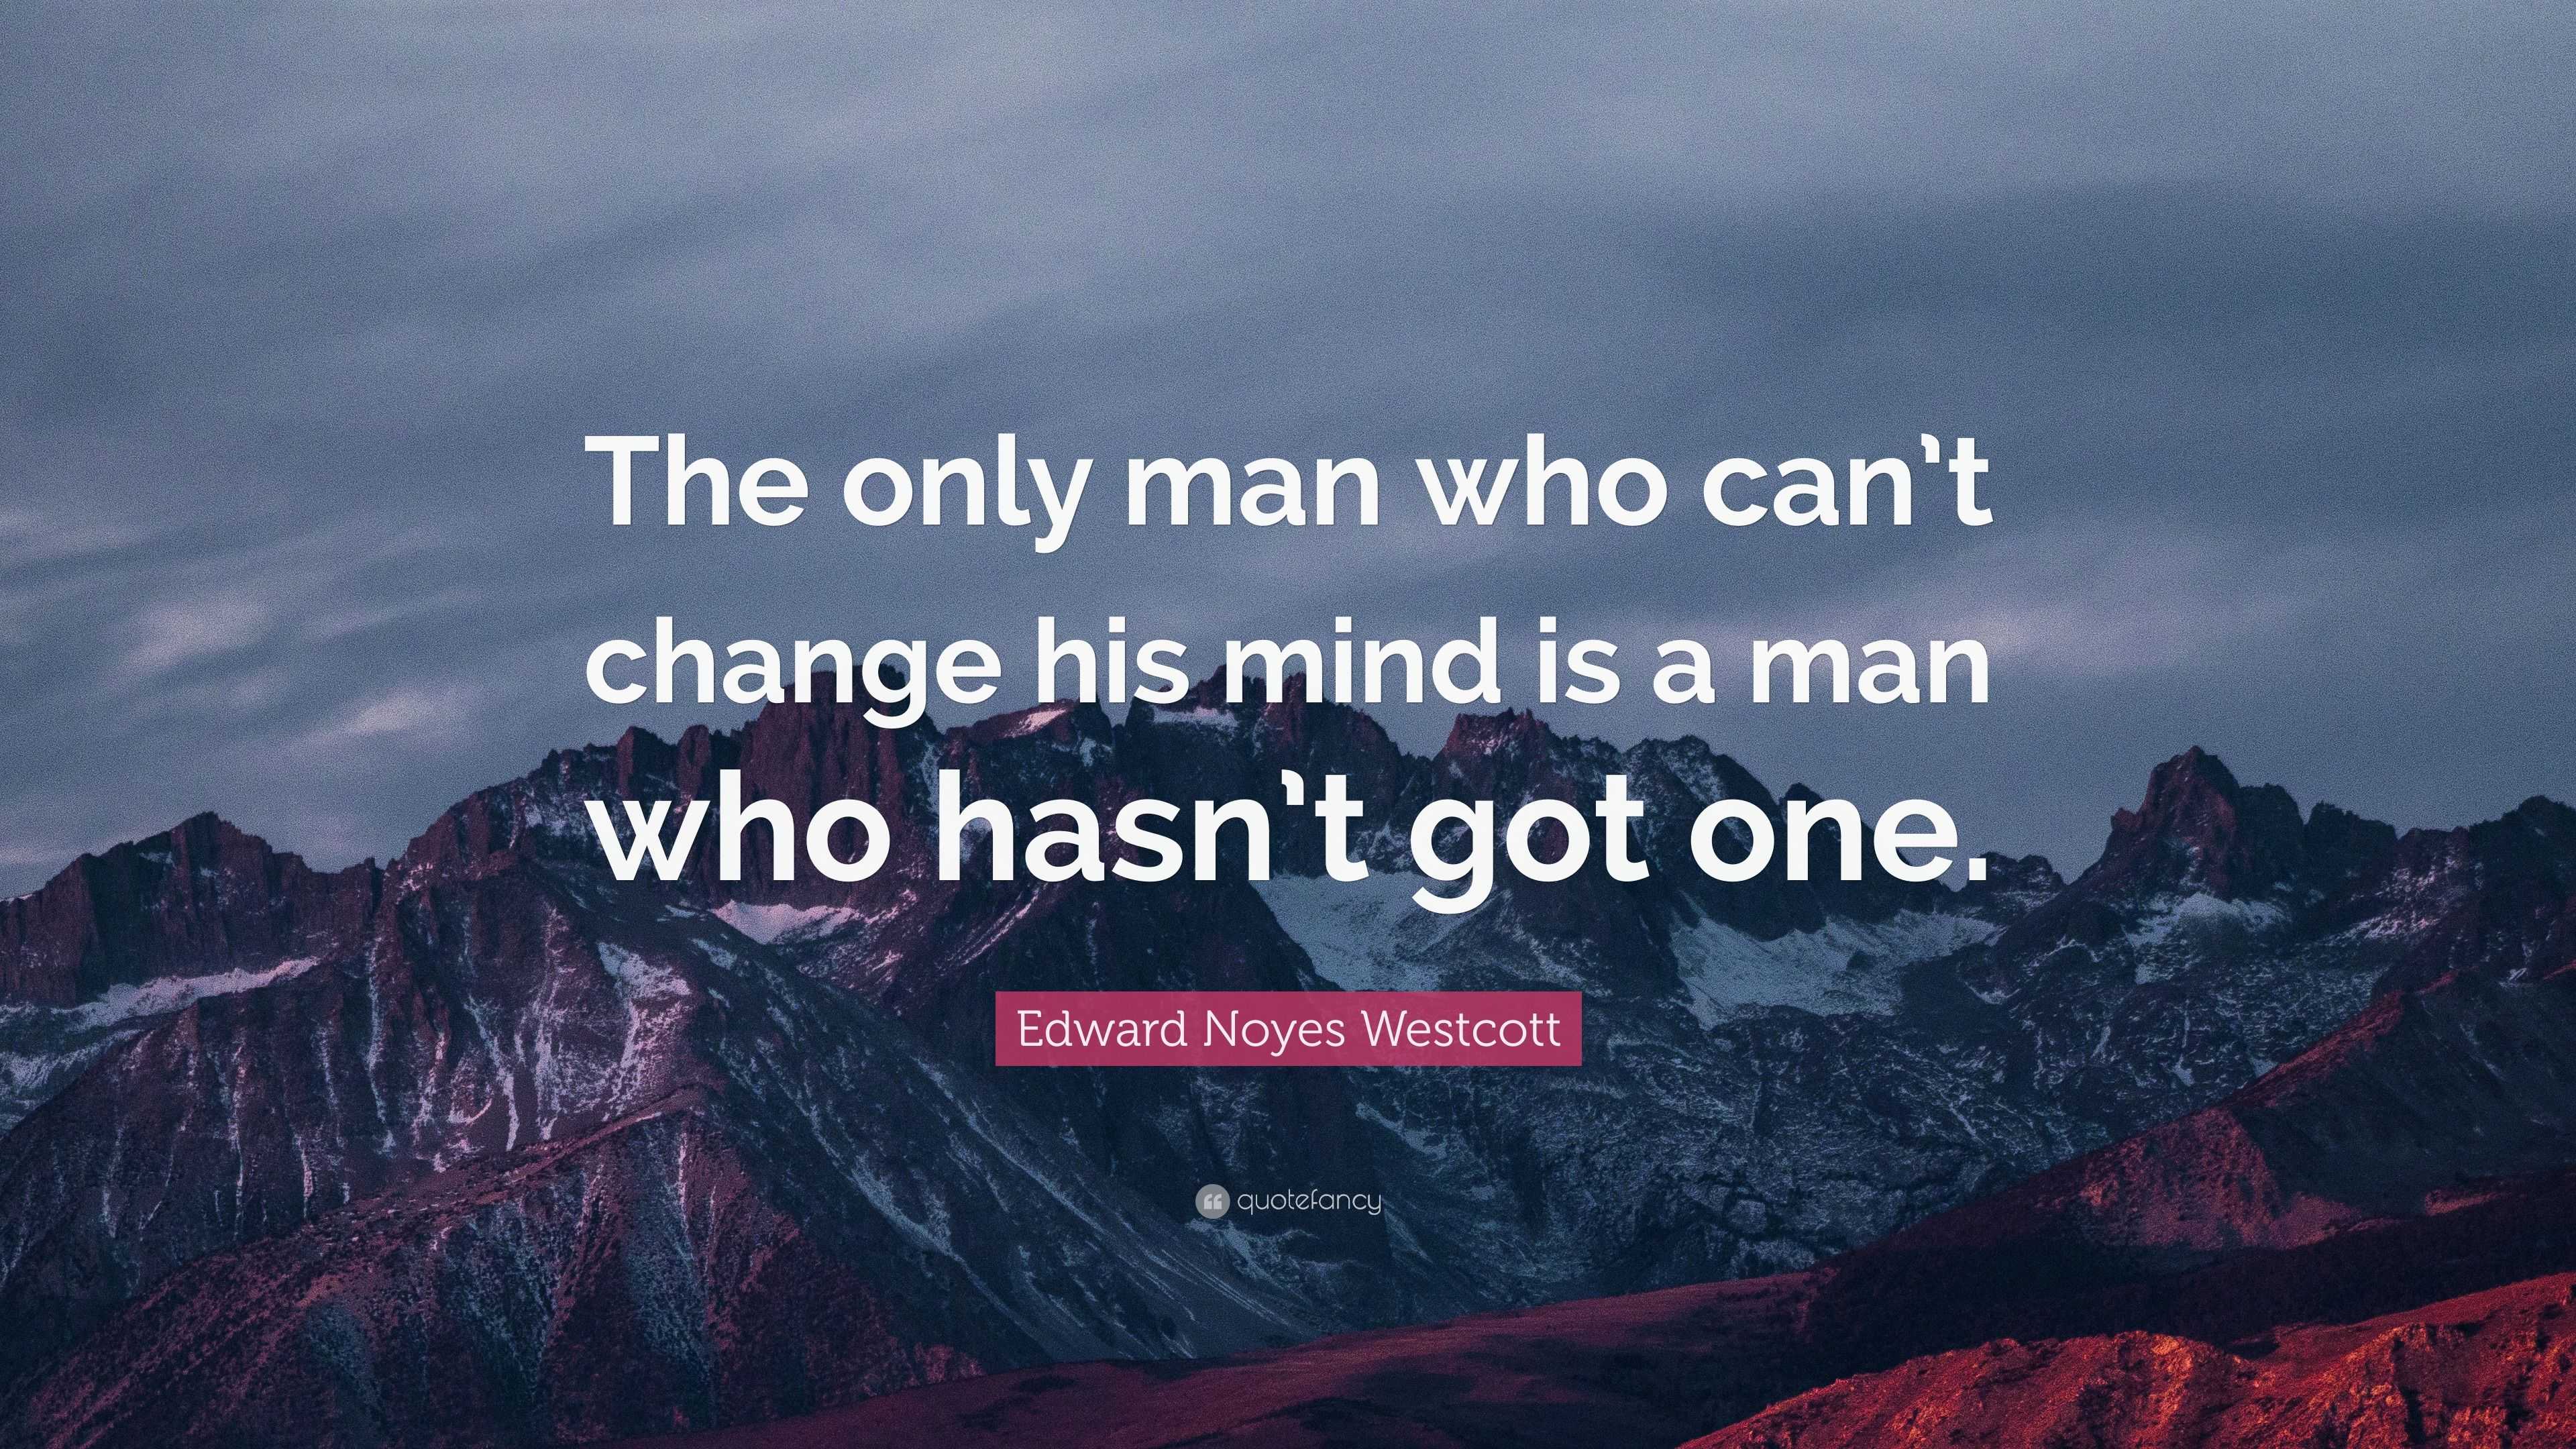 Edward Noyes Westcott Quote: “The only man who can’t change his mind is ...